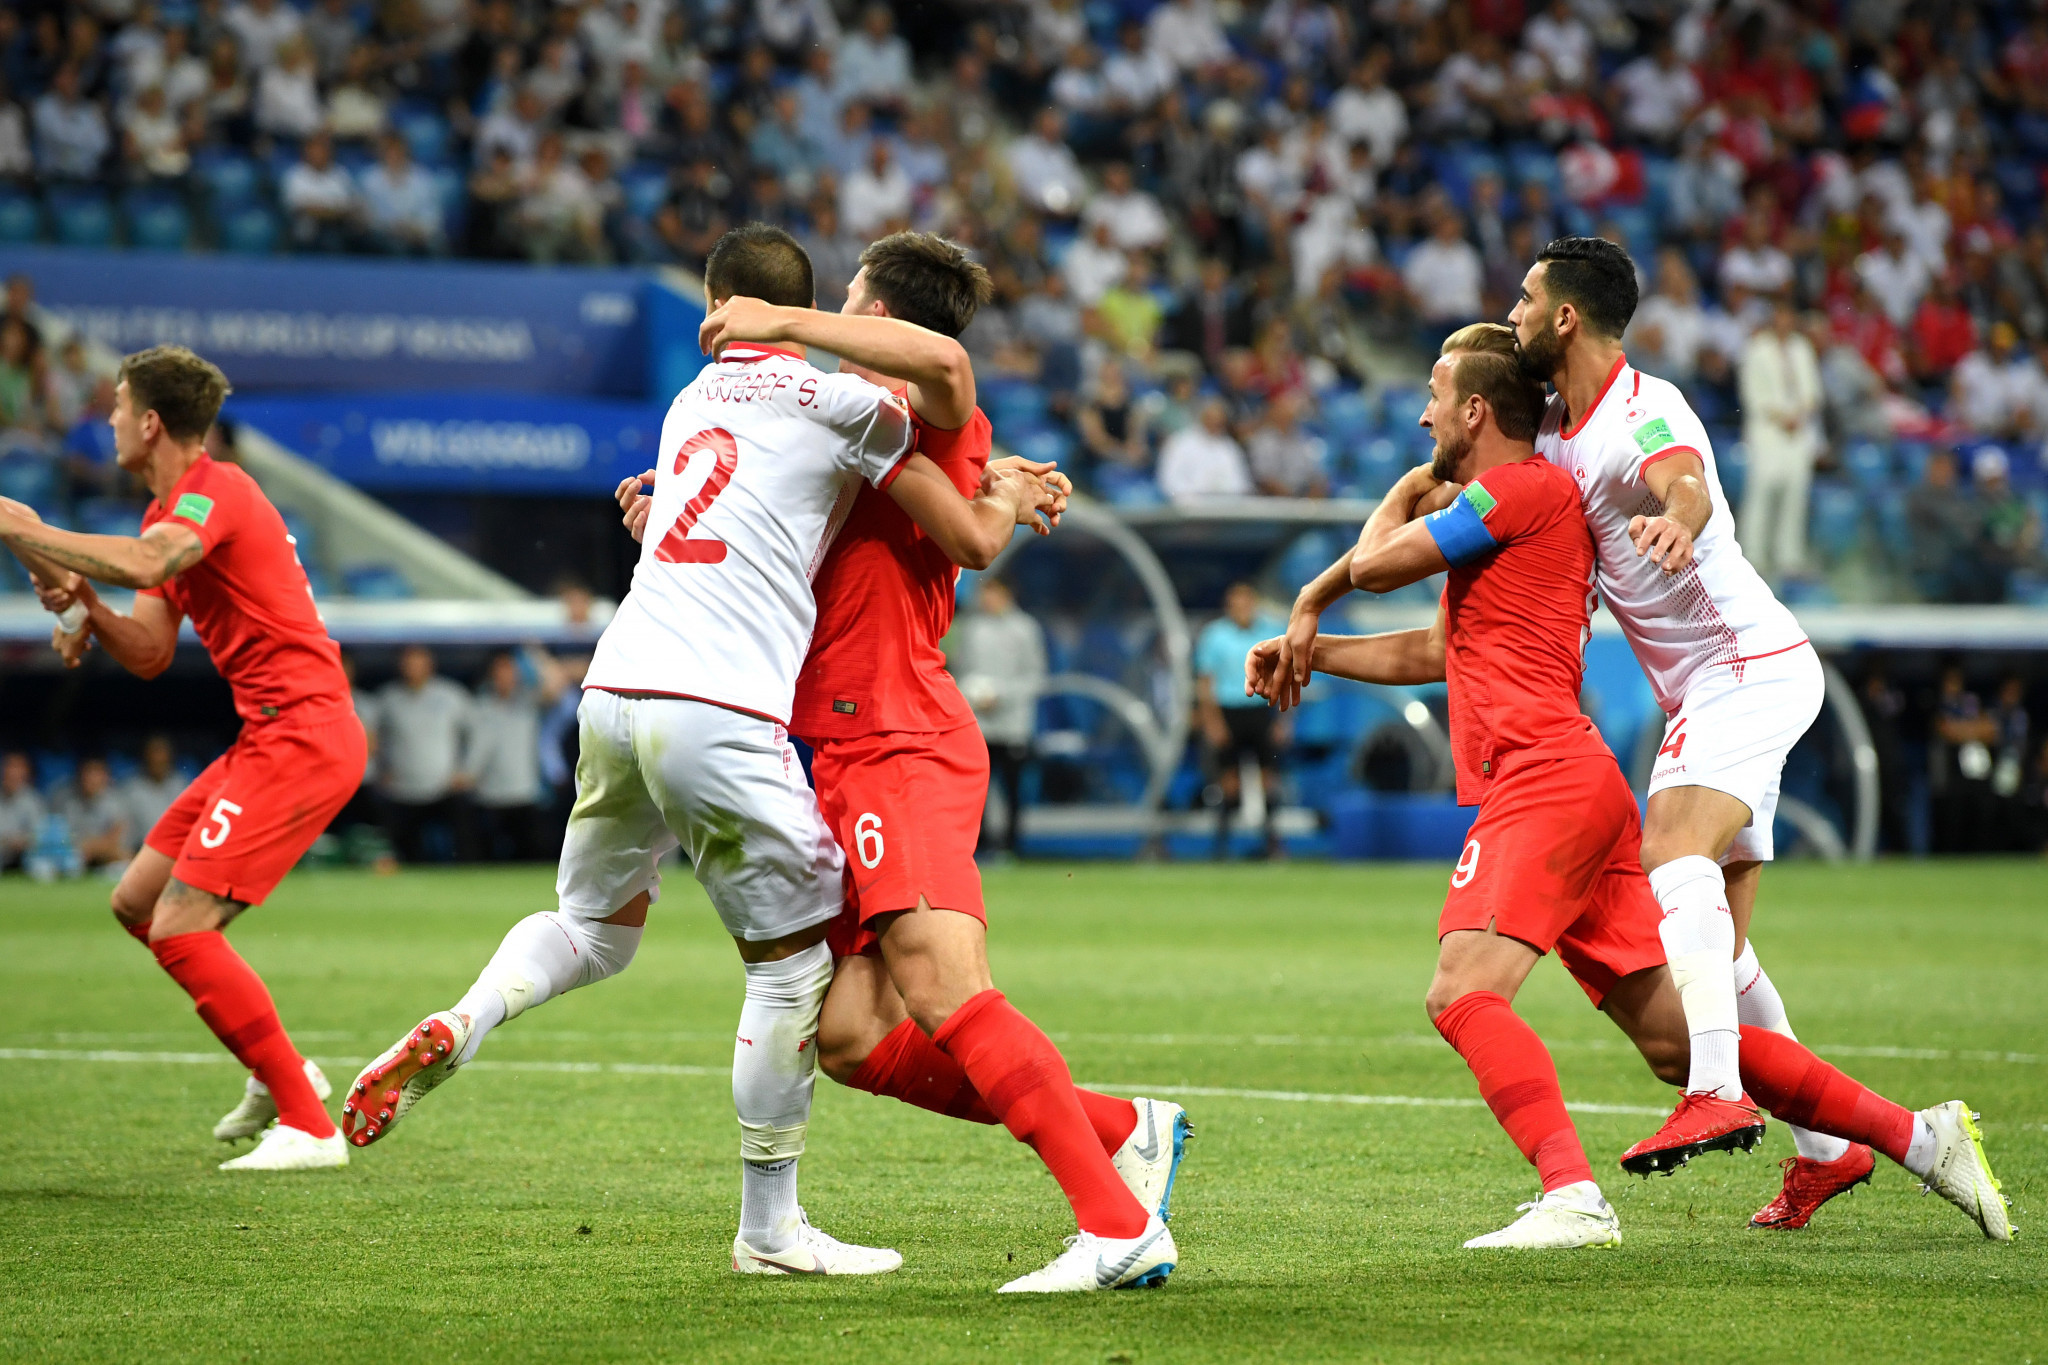 VAR received criticism during the World Cup for frequently failing to spot incidents which were seen by many as clear fouls ©Getty Images